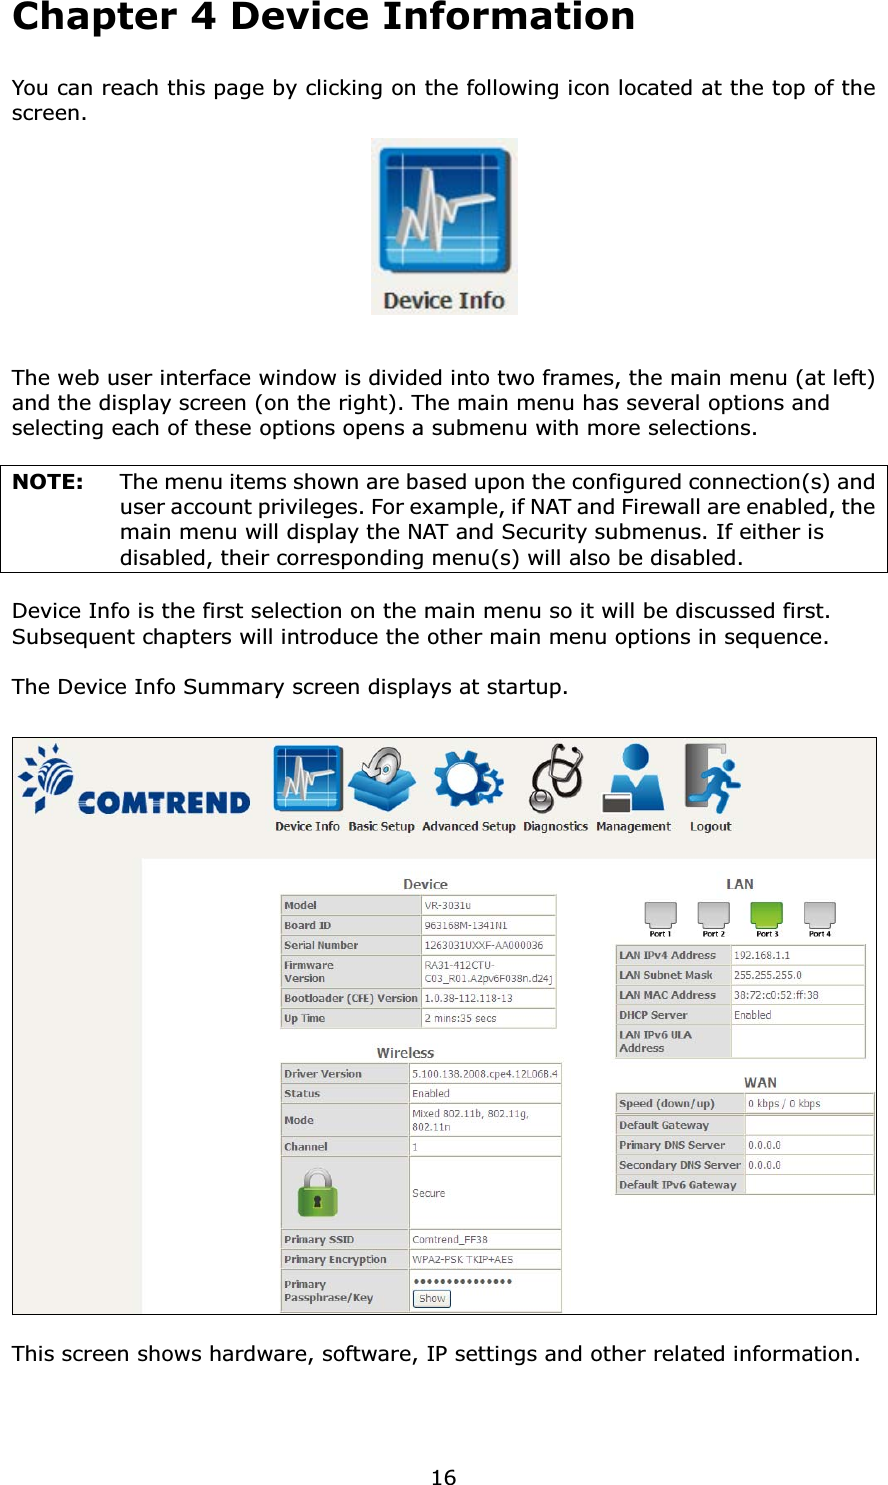 16Chapter 4 Device InformationYou can reach this page by clicking on the following icon located at the top of the screen.The web user interface window is divided into two frames, the main menu (at left) and the display screen (on the right). The main menu has several options and selecting each of these options opens a submenu with more selections.NOTE:  The menu items shown are based upon the configured connection(s) and user account privileges. For example, if NAT and Firewall are enabled, the main menu will display the NAT and Security submenus. If either is disabled, their corresponding menu(s) will also be disabled.Device Info is the first selection on the main menu so it will be discussed first.   Subsequent chapters will introduce the other main menu options in sequence.The Device Info Summary screen displays at startup.This screen shows hardware, software, IP settings and other related information.